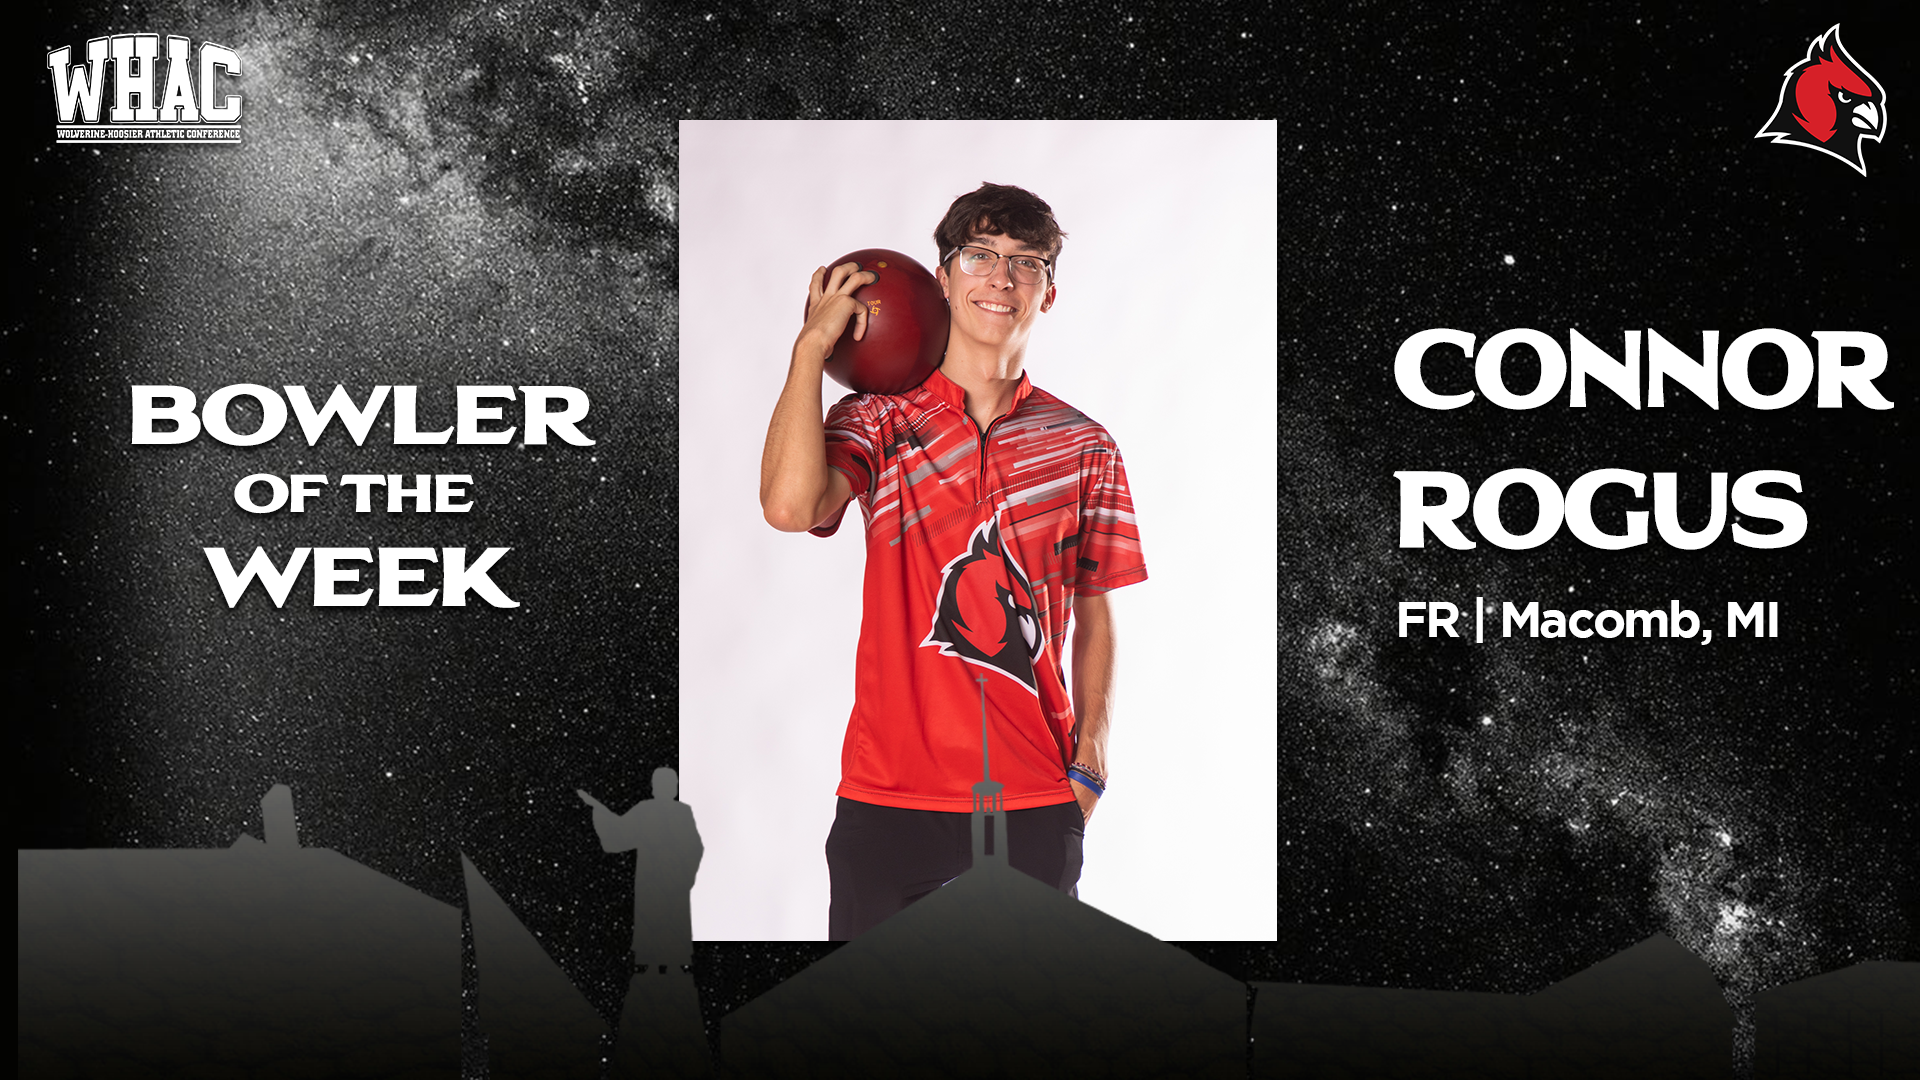 Rogus earns his first WHAC Bowler of the Week